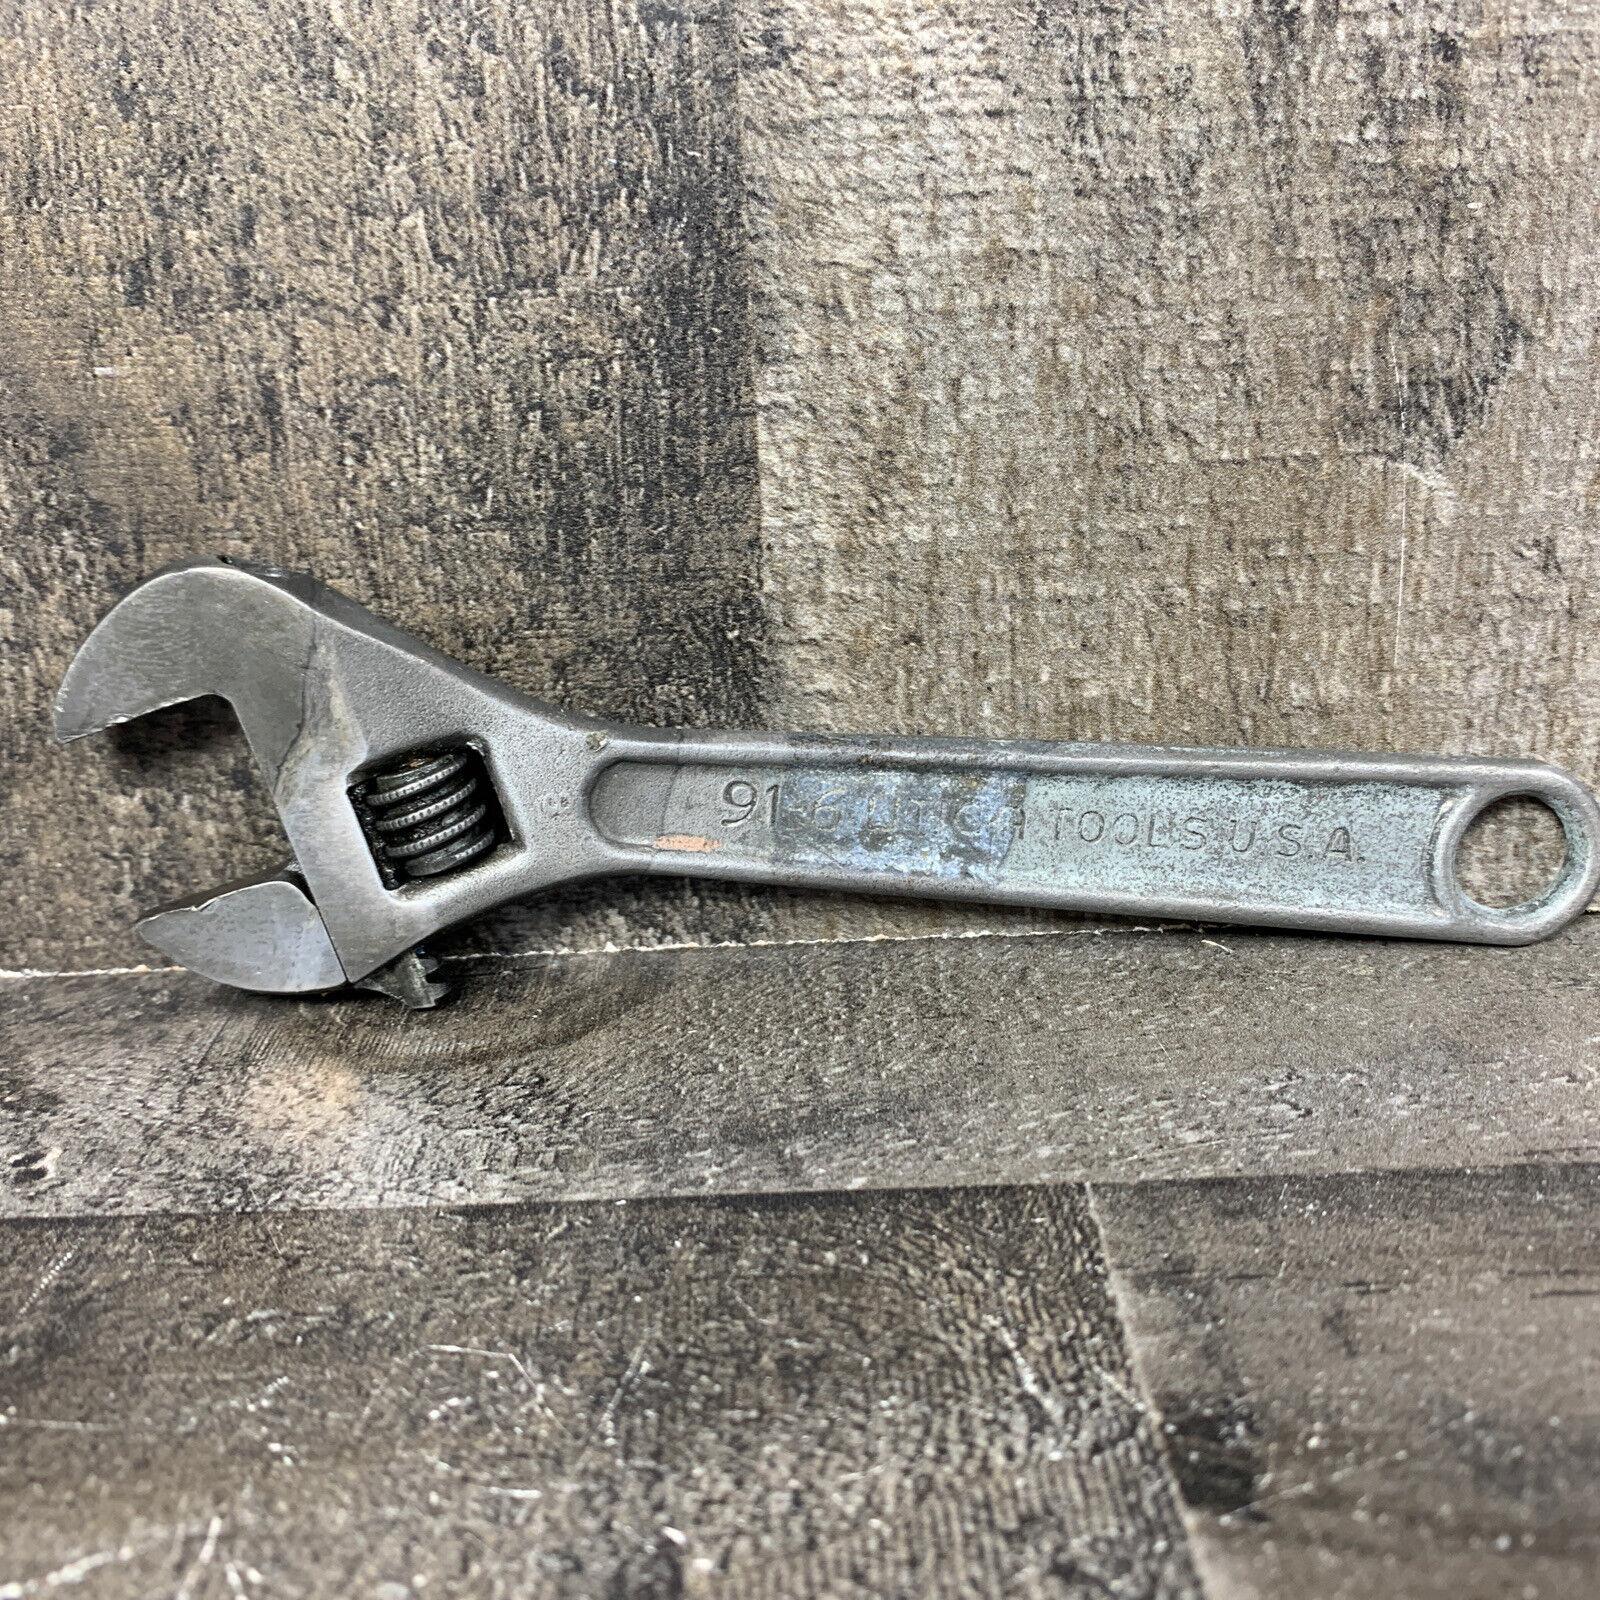 VINTAGE Utica Tools 6" Inch Adjustable Wrench 91-6 Made In USA Alloy Steel Tool